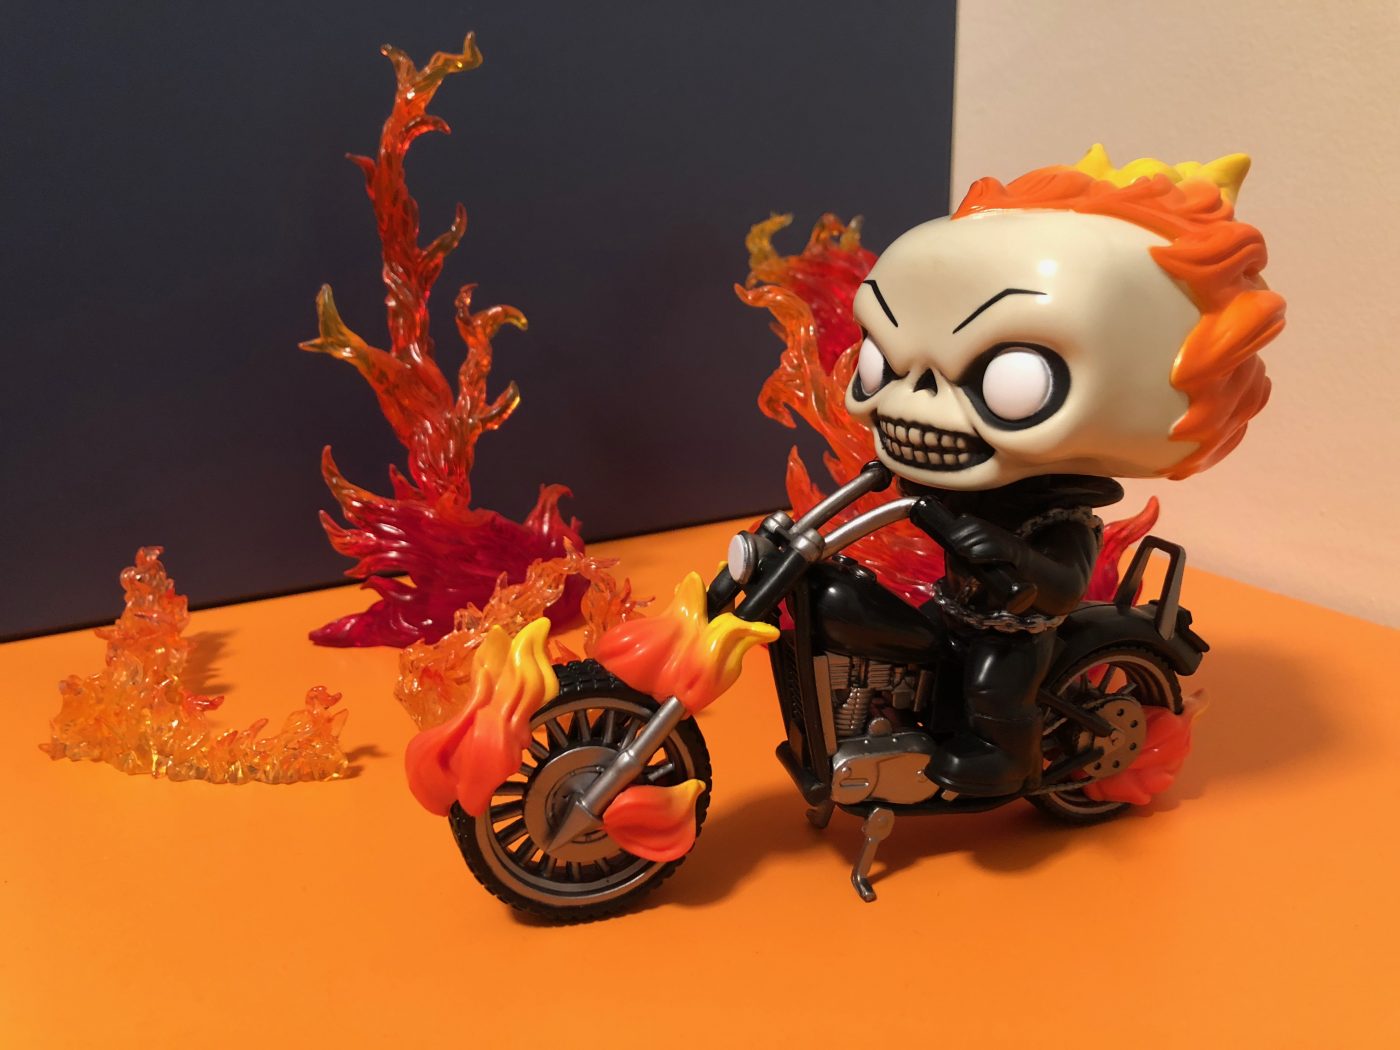 Unboxing/Review: Funko Pop! Rides: Marvel Classic Ghost Rider with Bike Vinyl Figure